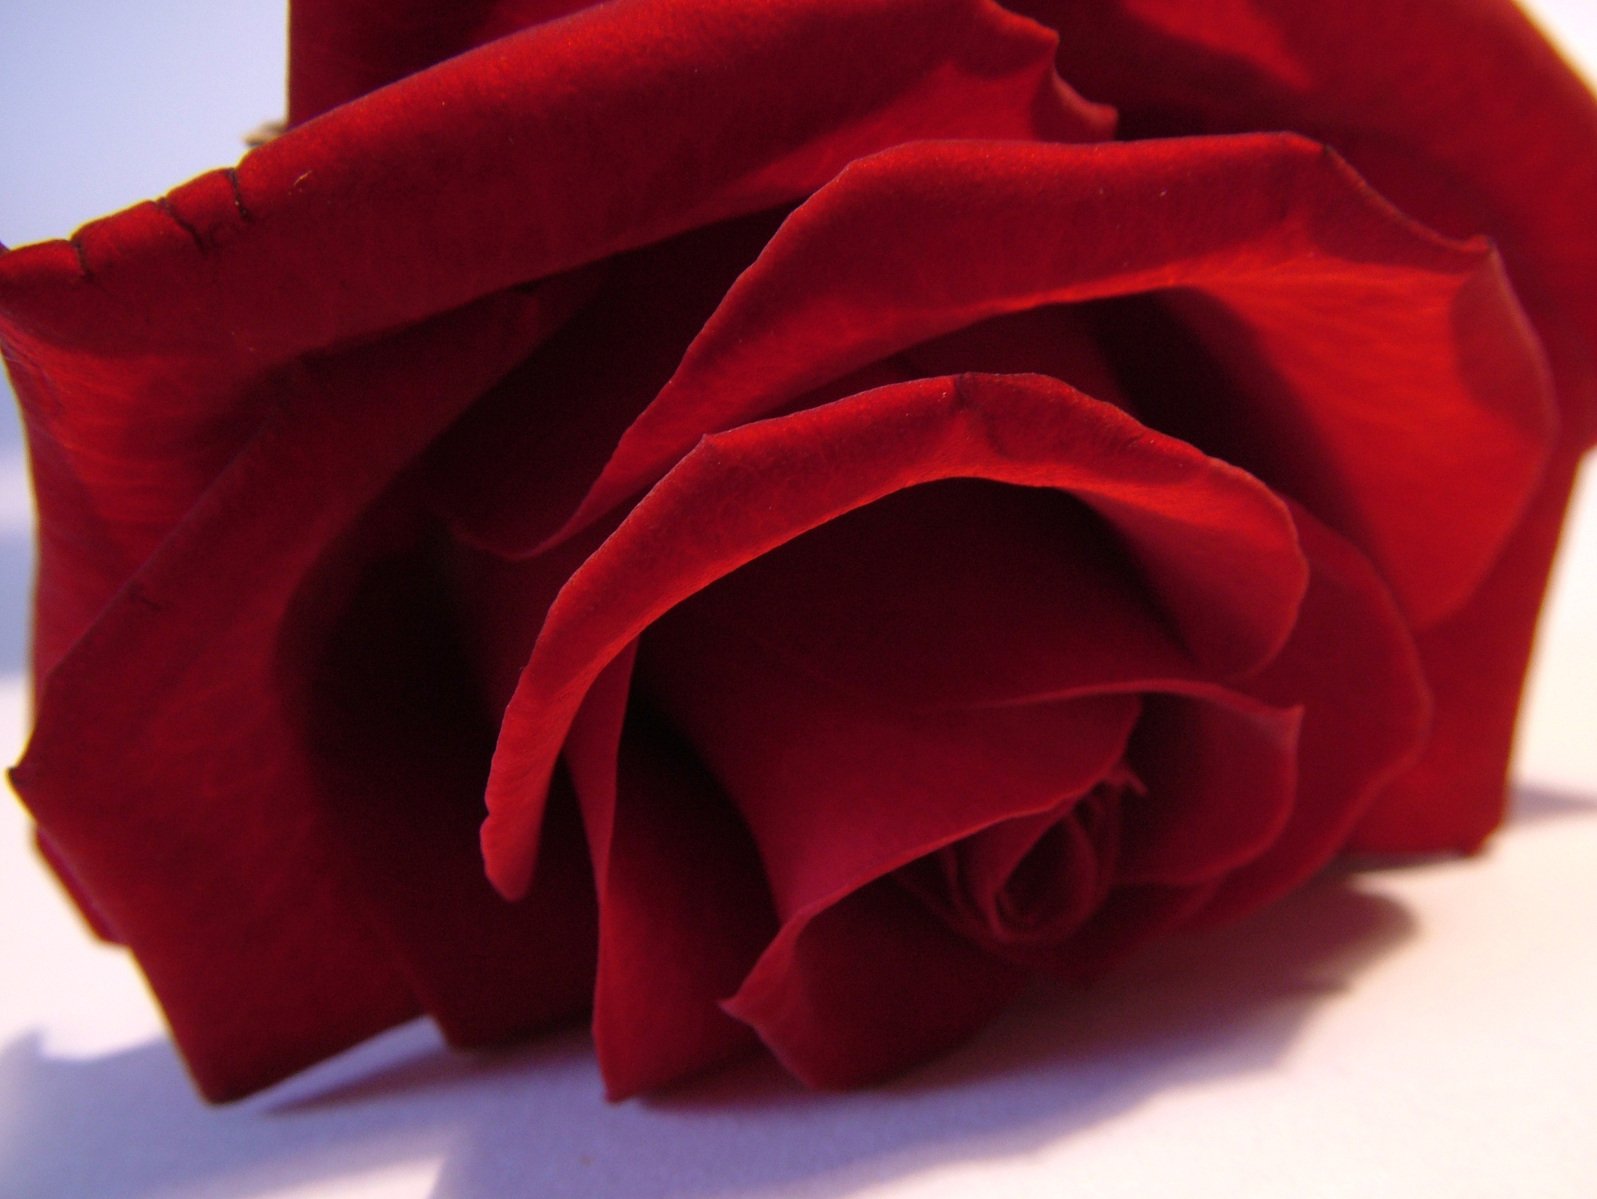 red roses are shown on a white background